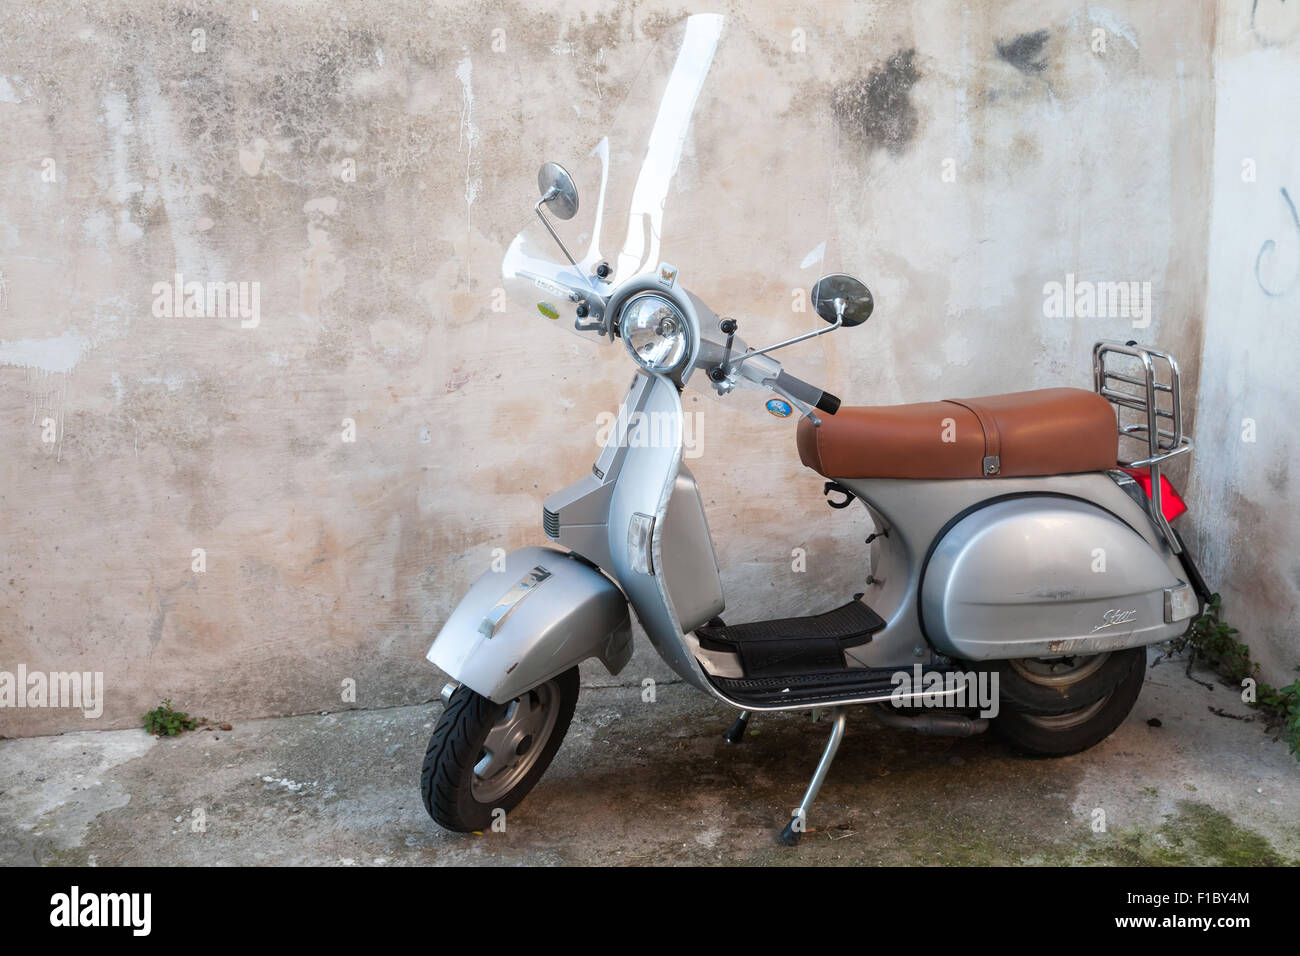 Gaeta, Italy - August 19, 2015: Classical yellow Vespa scooter stands parked near the wall Stock Photo